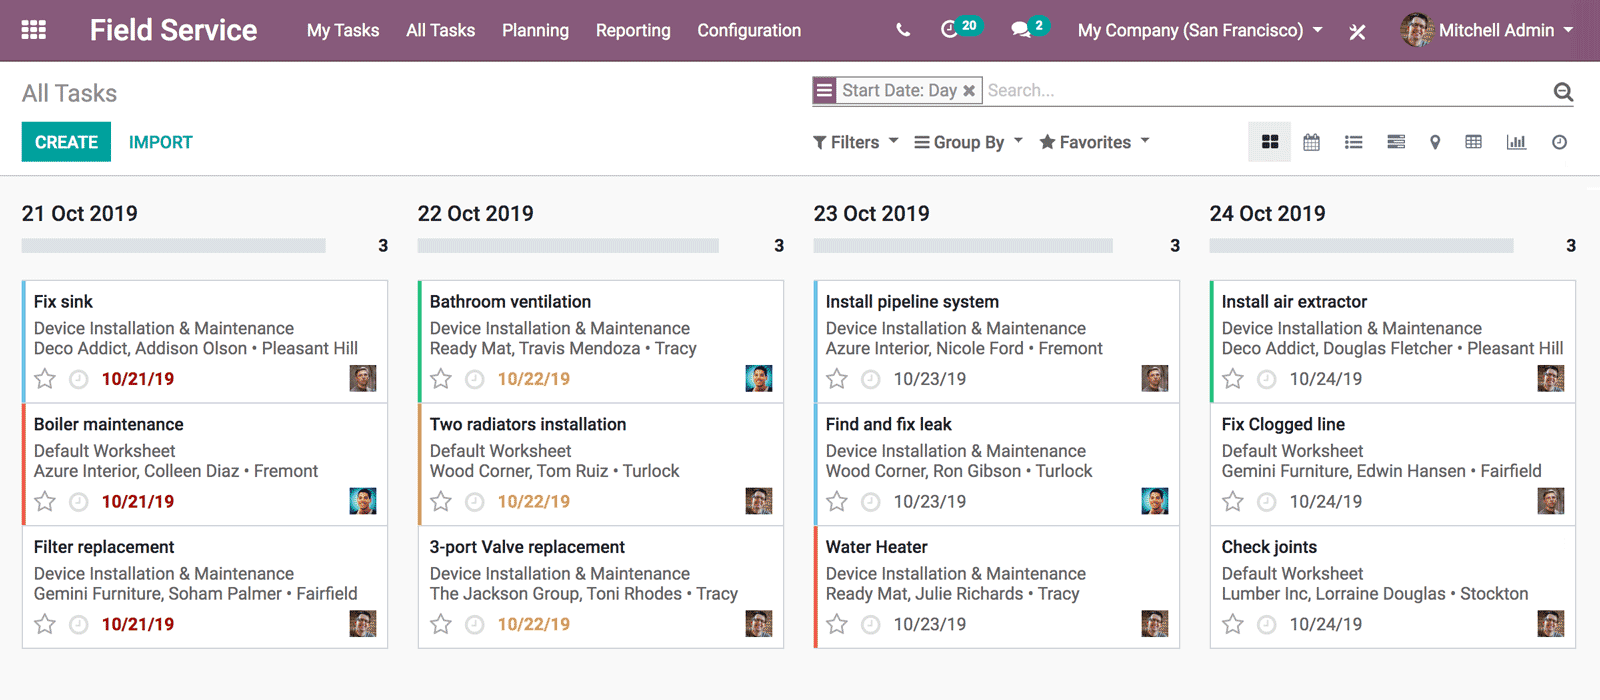 Odoo Field Service interface with all tasks